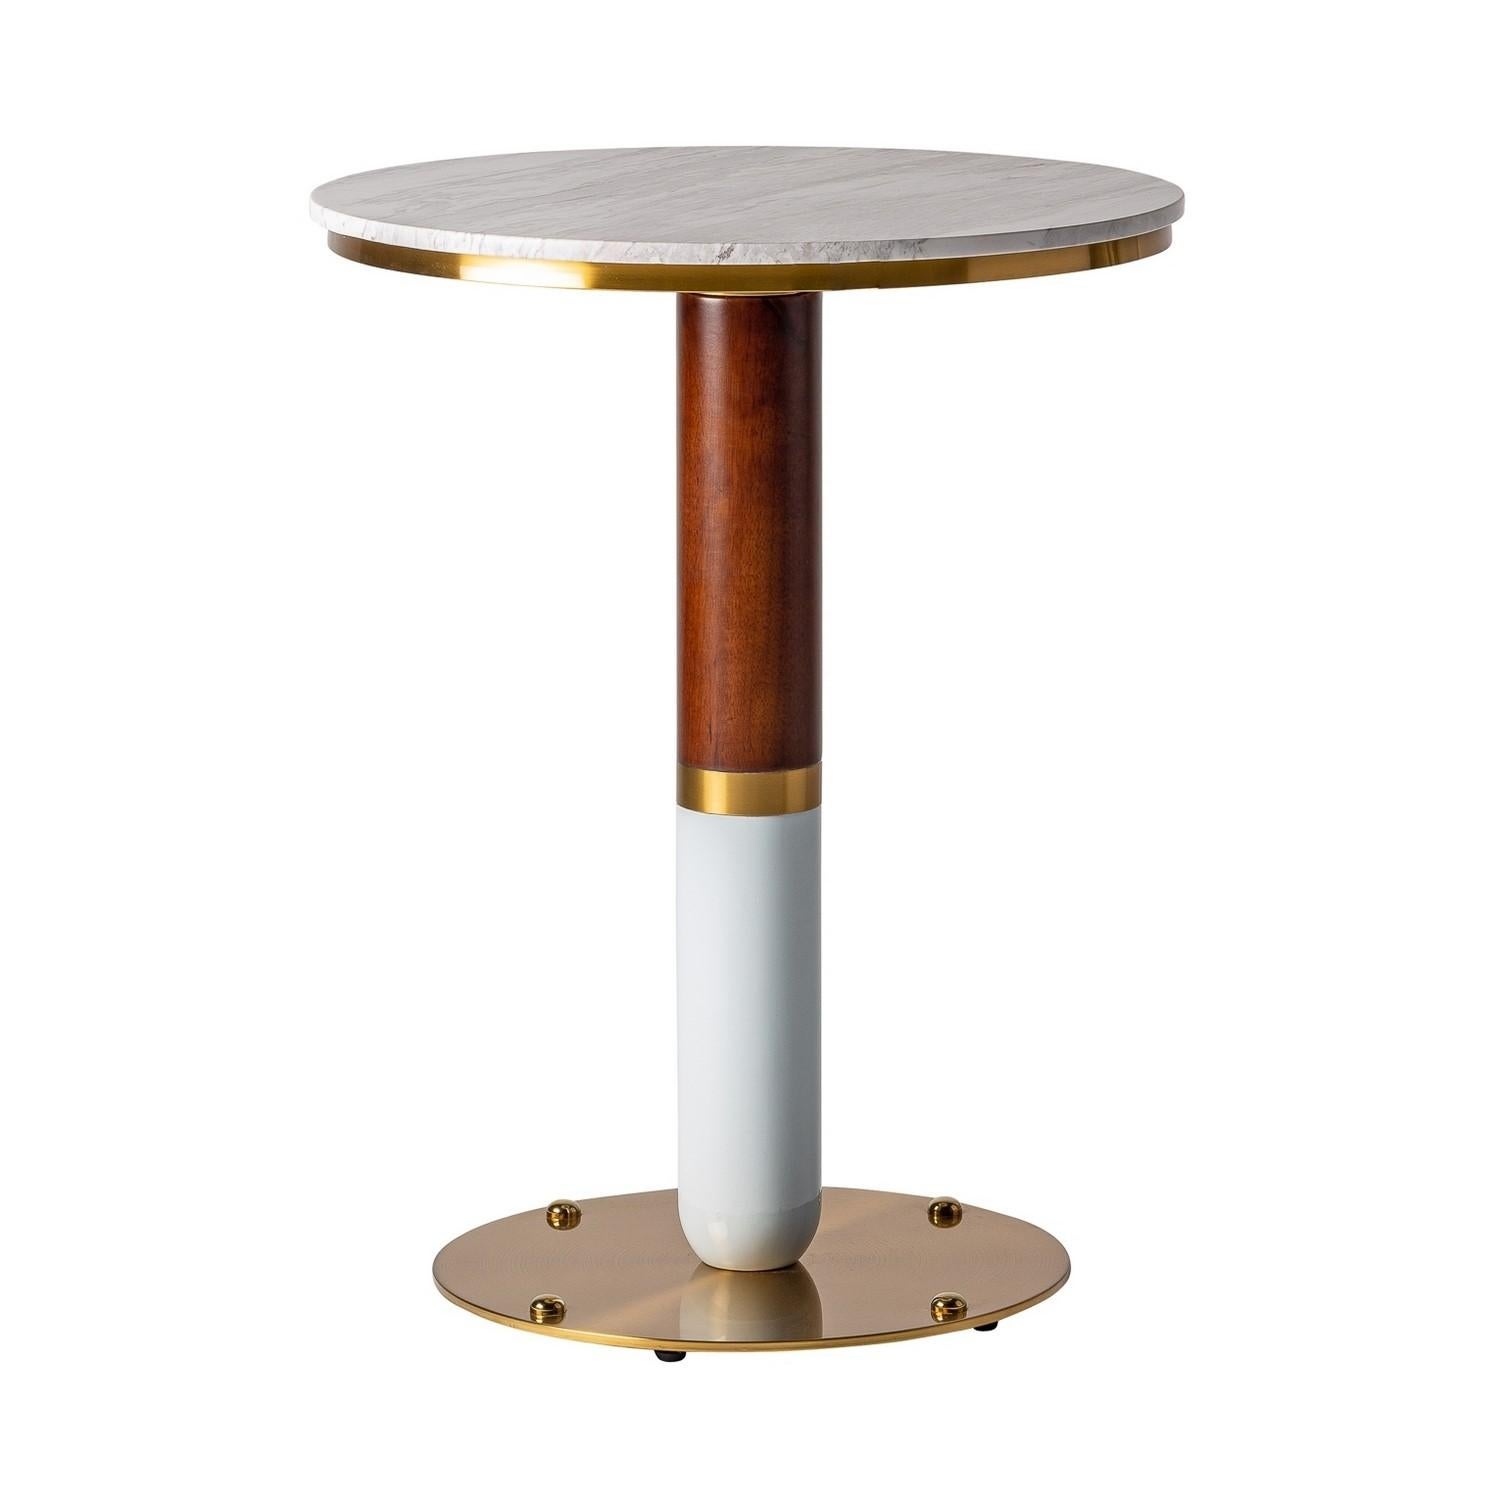 Unknown Art Deco Style Round White Marble and Walnut Wooden Pedestal Table For Sale